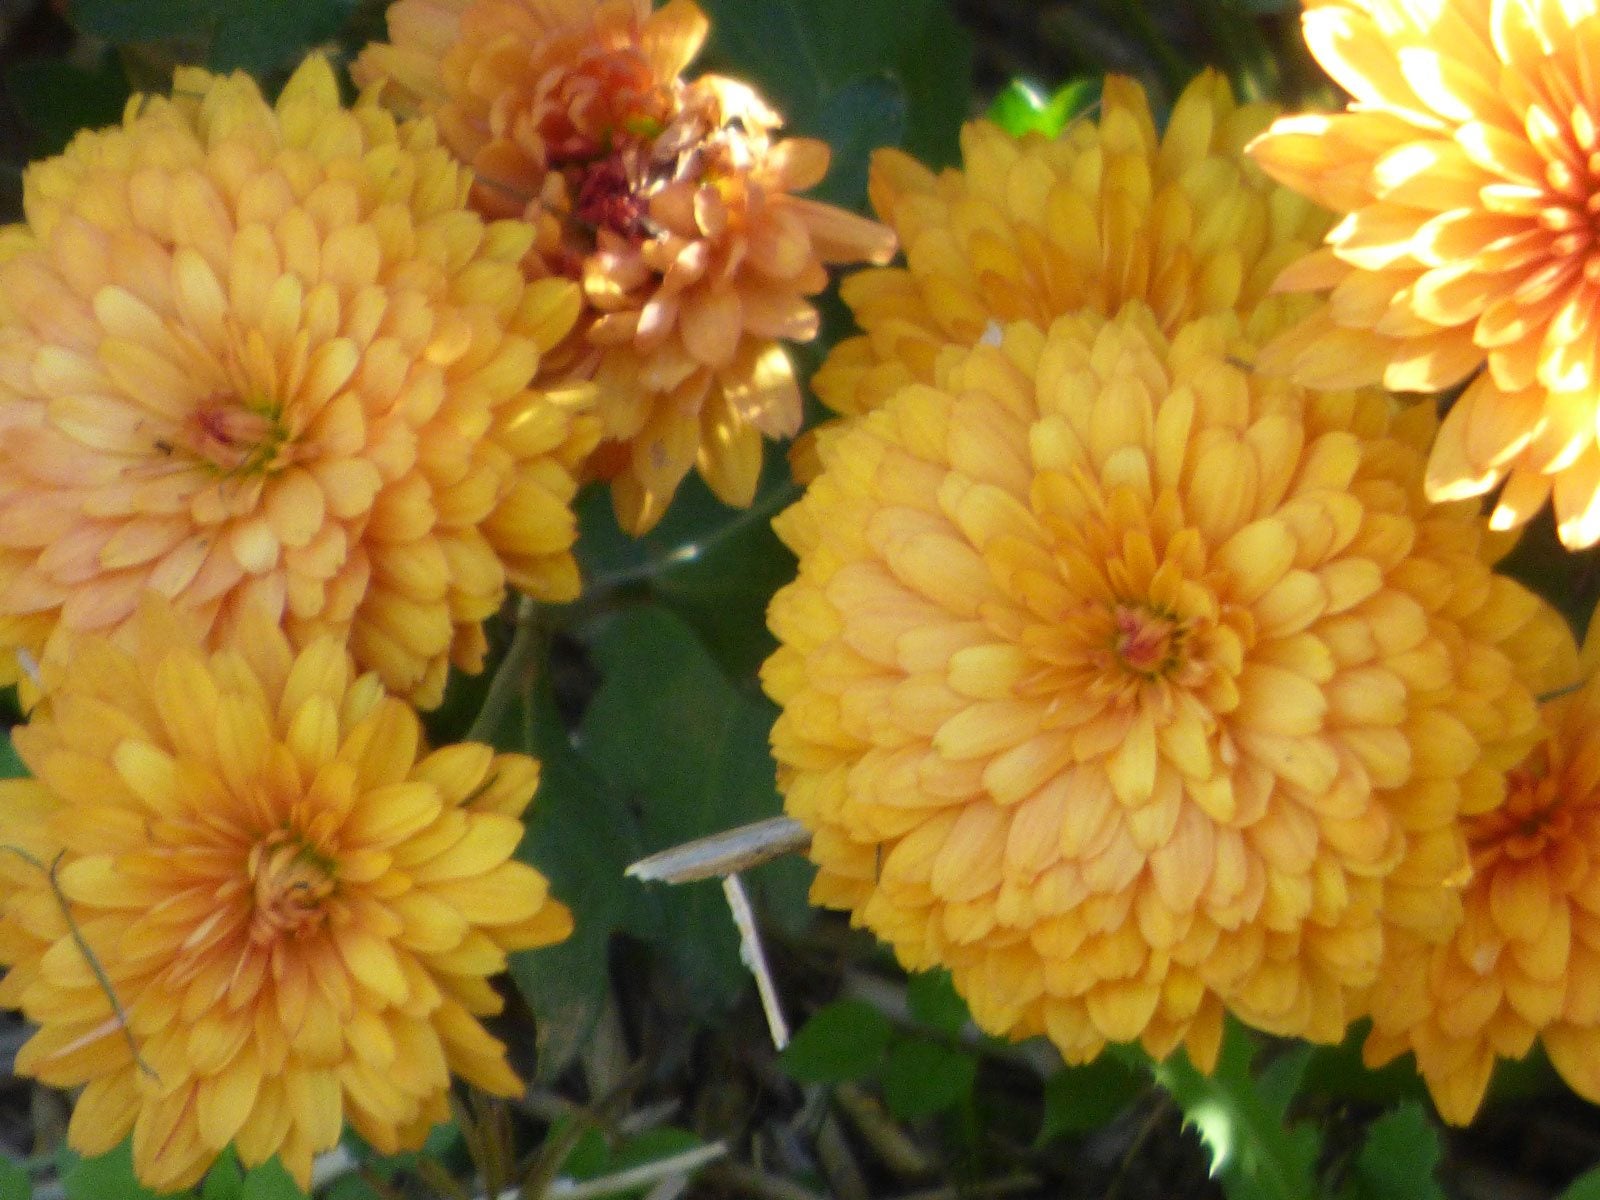 5 Fascinating Facts About Chrysanthemums to Get You in a Fall Mood